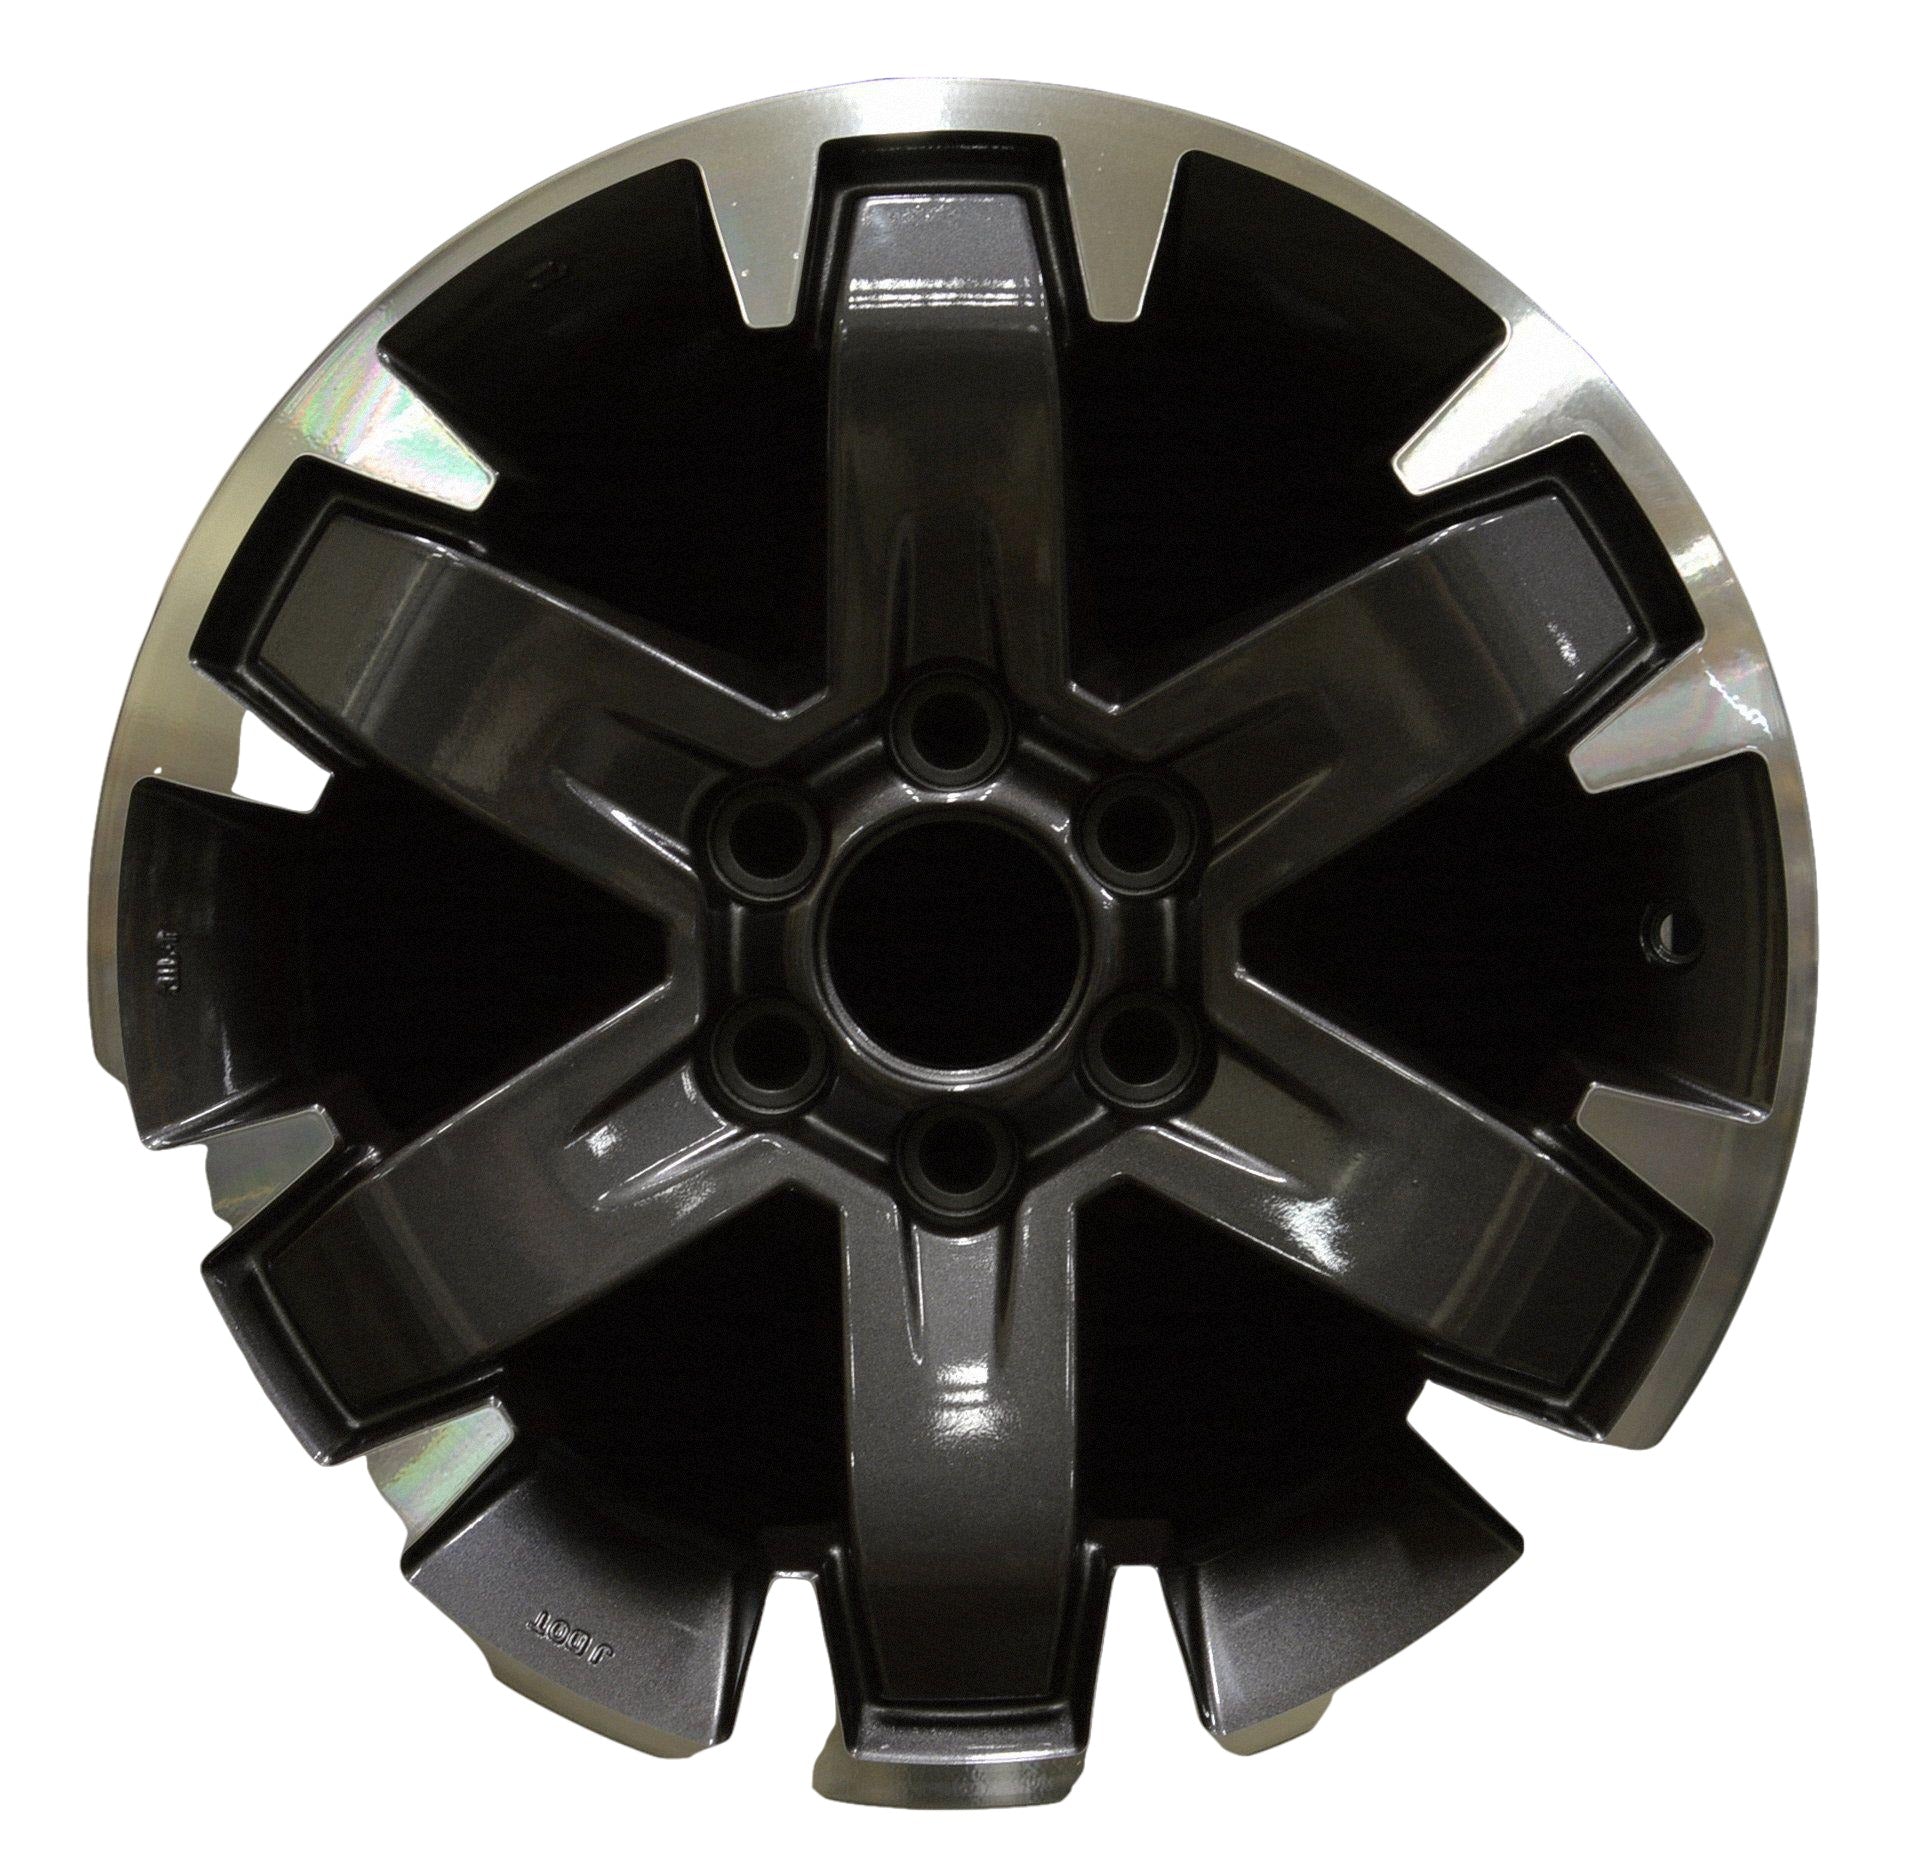 Nissan Frontier  2014, 2015, 2016, 2017 Factory OEM Car Wheel Size 16x7 Alloy WAO.62612.LC110.FC